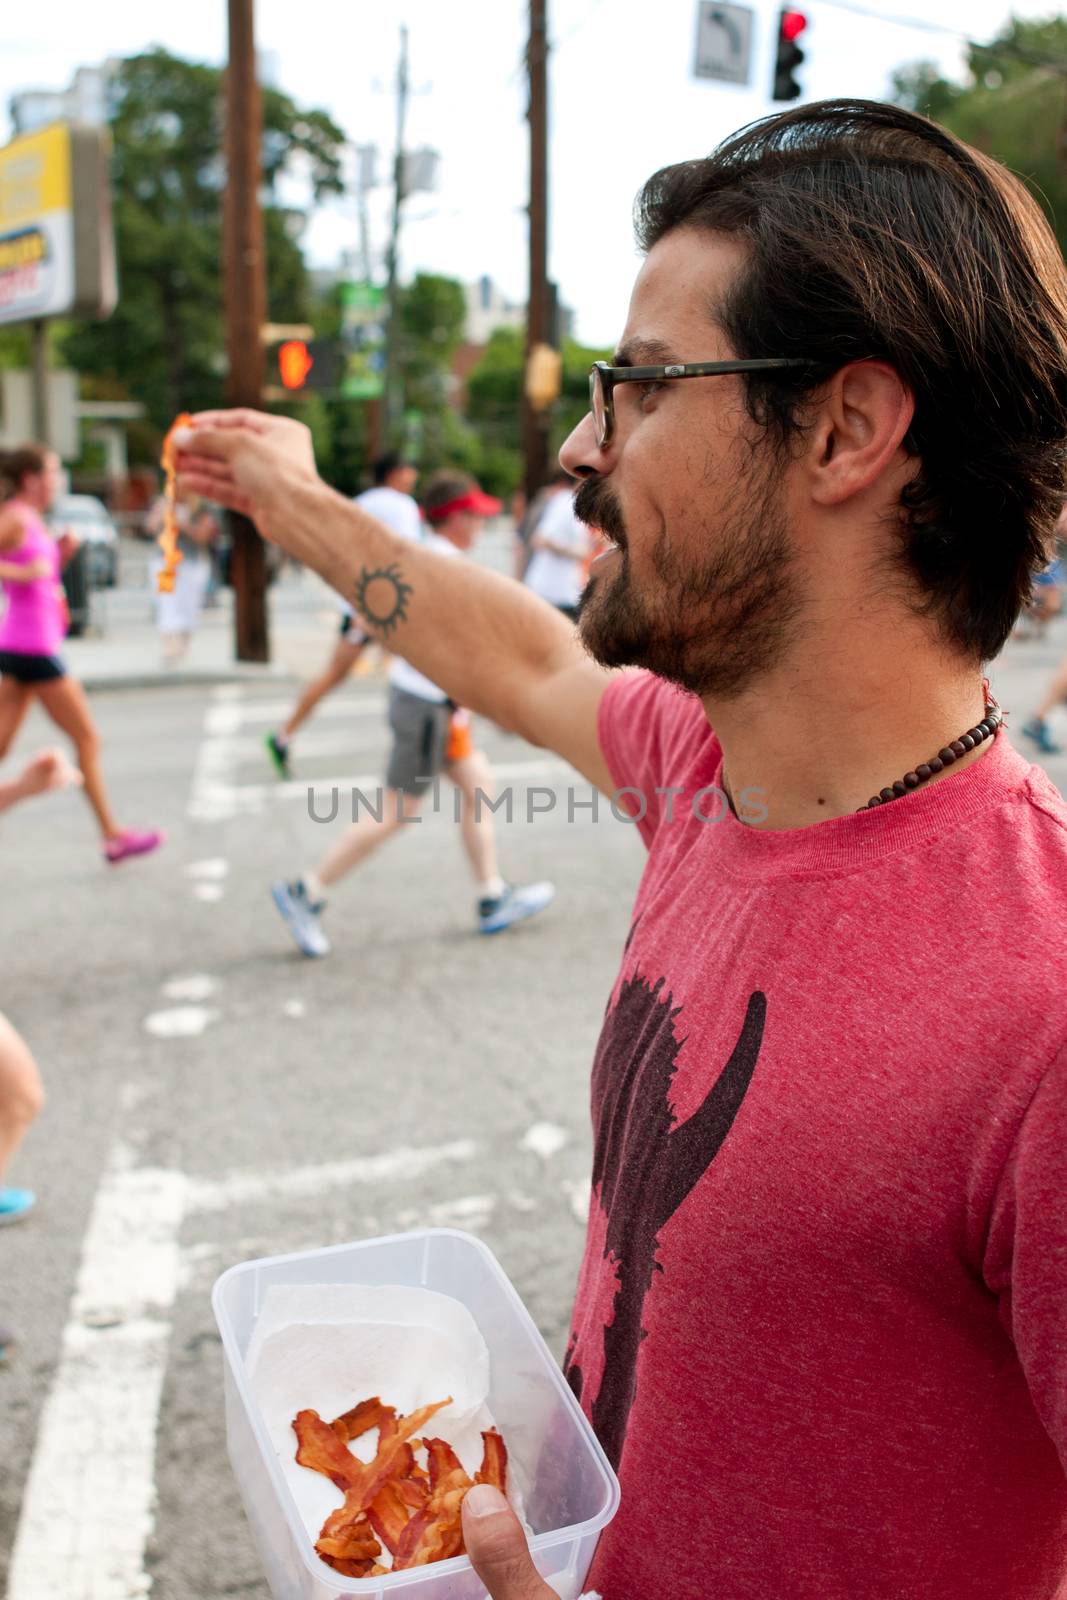 Man Gives Out Bacon Strips To Runners In Atlanta Race by BluIz60